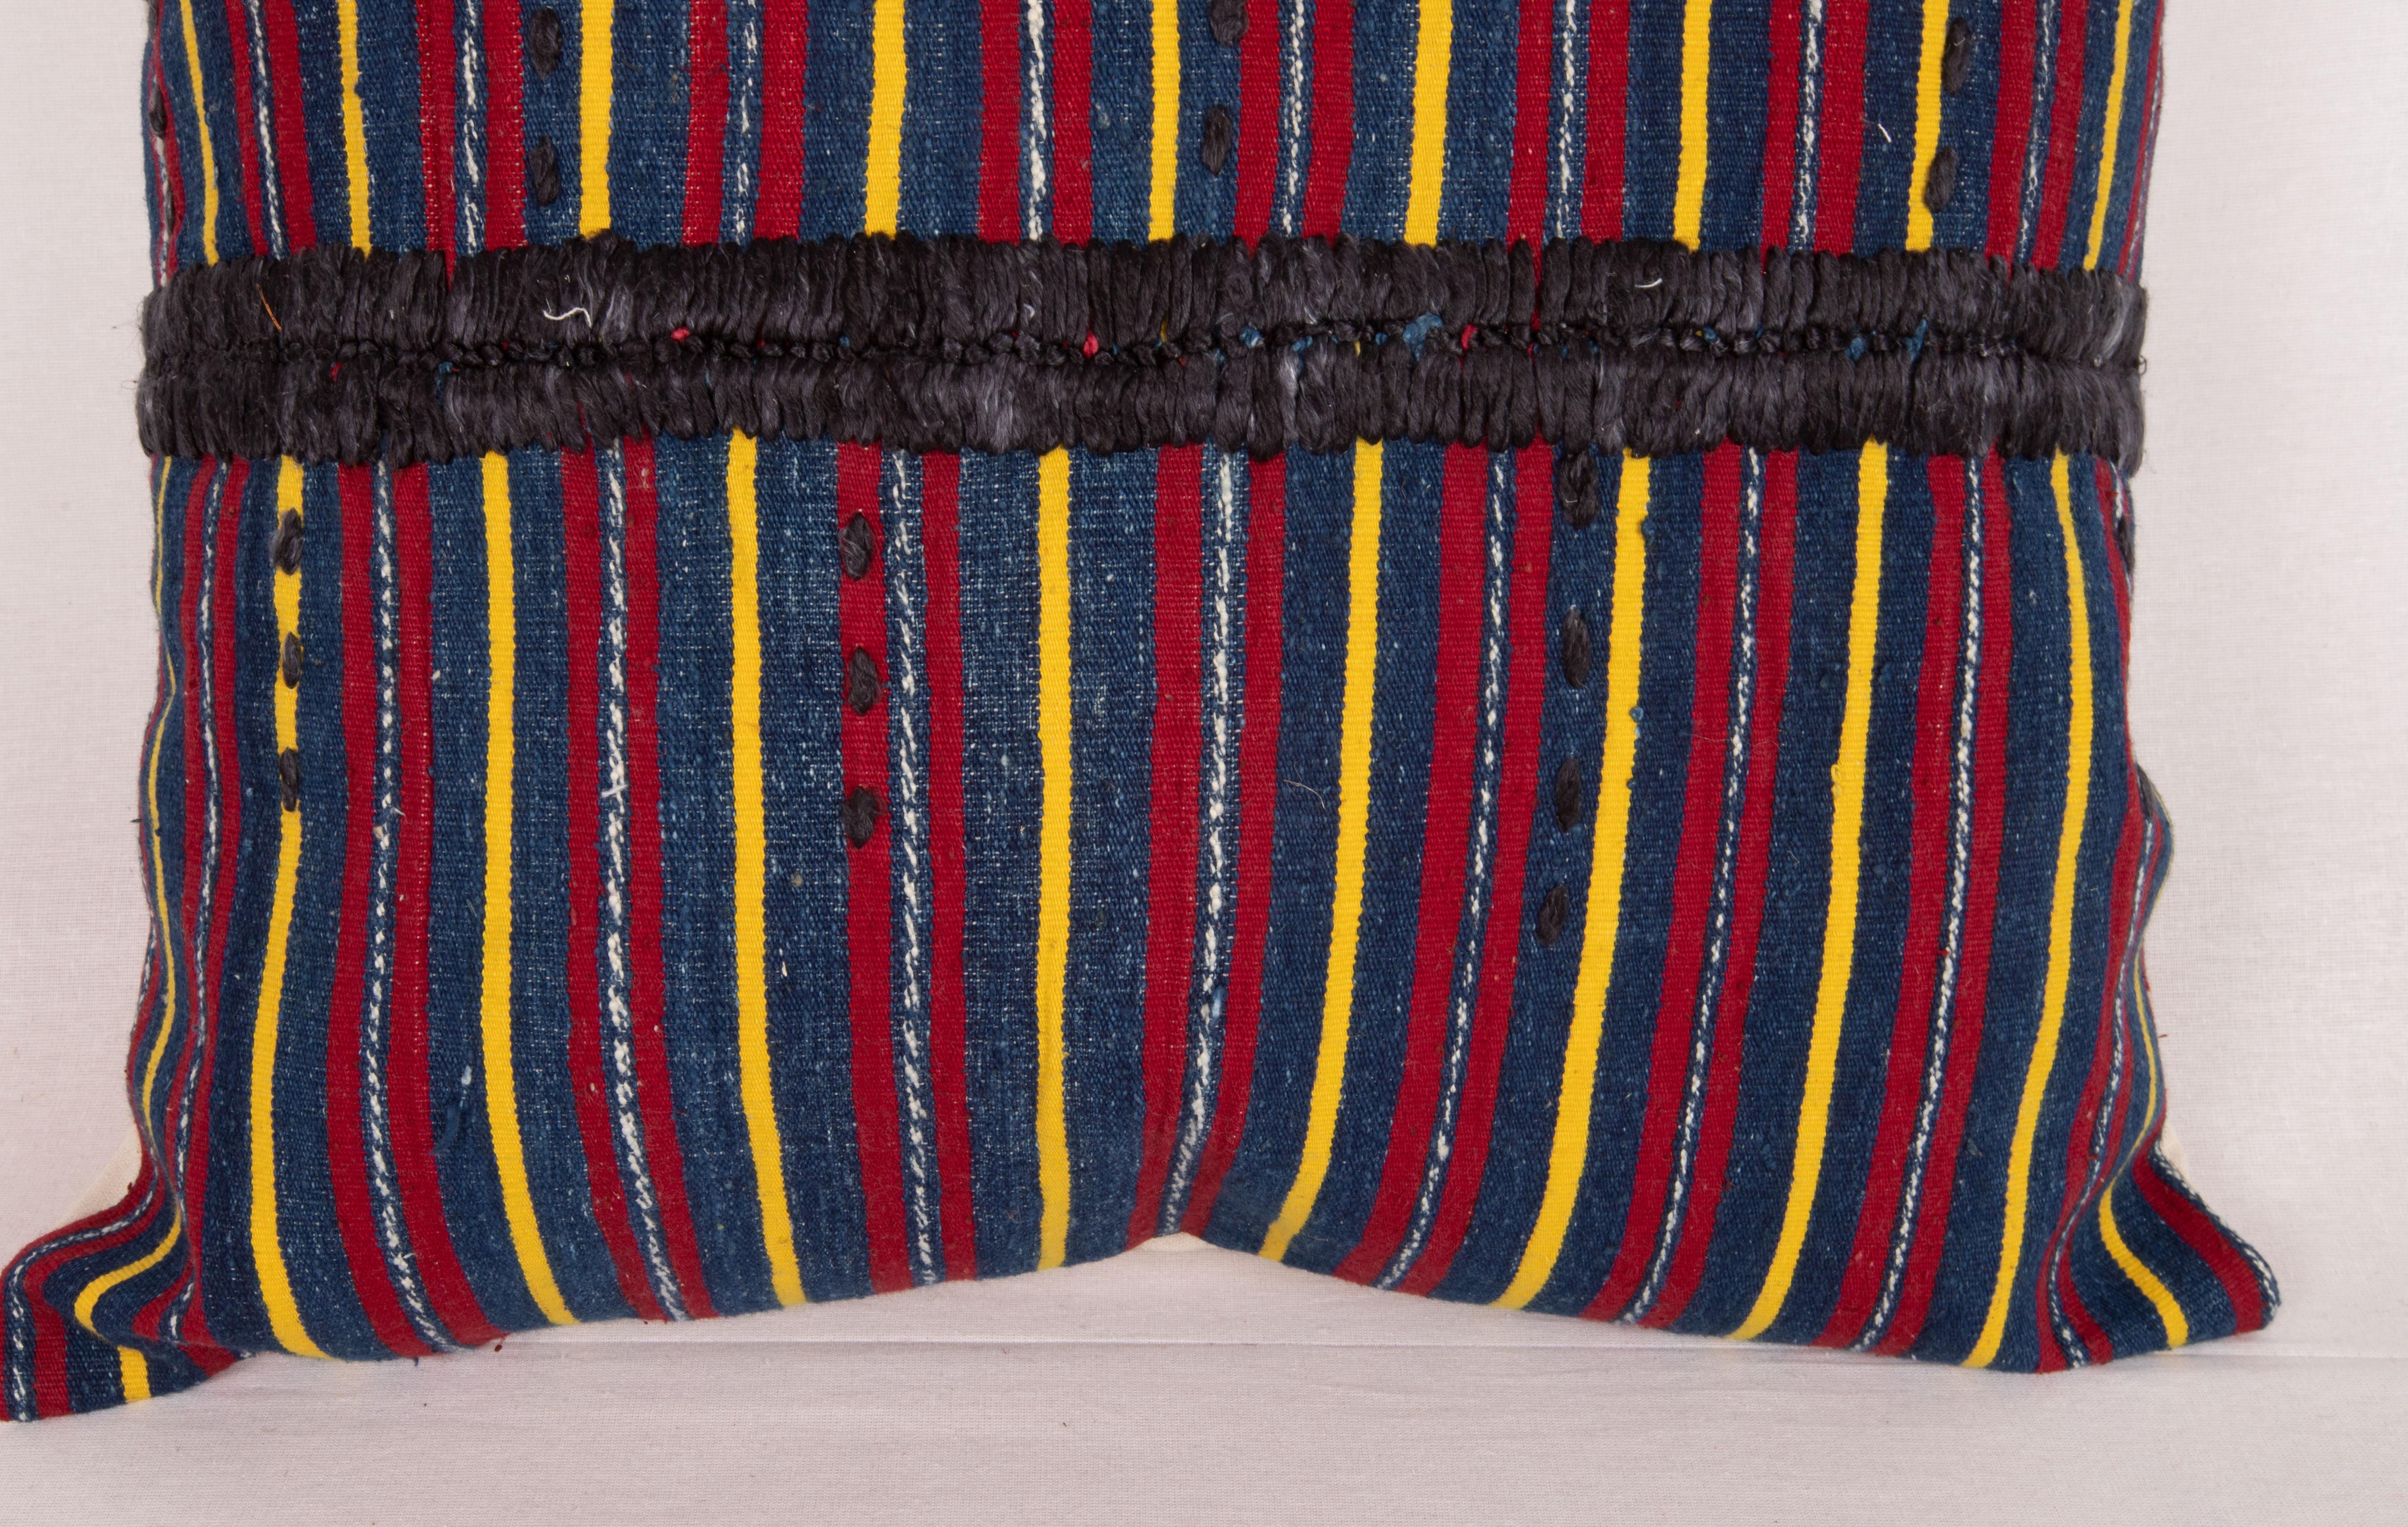 20th Century Rustic Anatolian Pillow Cover, Mid 20th C. For Sale